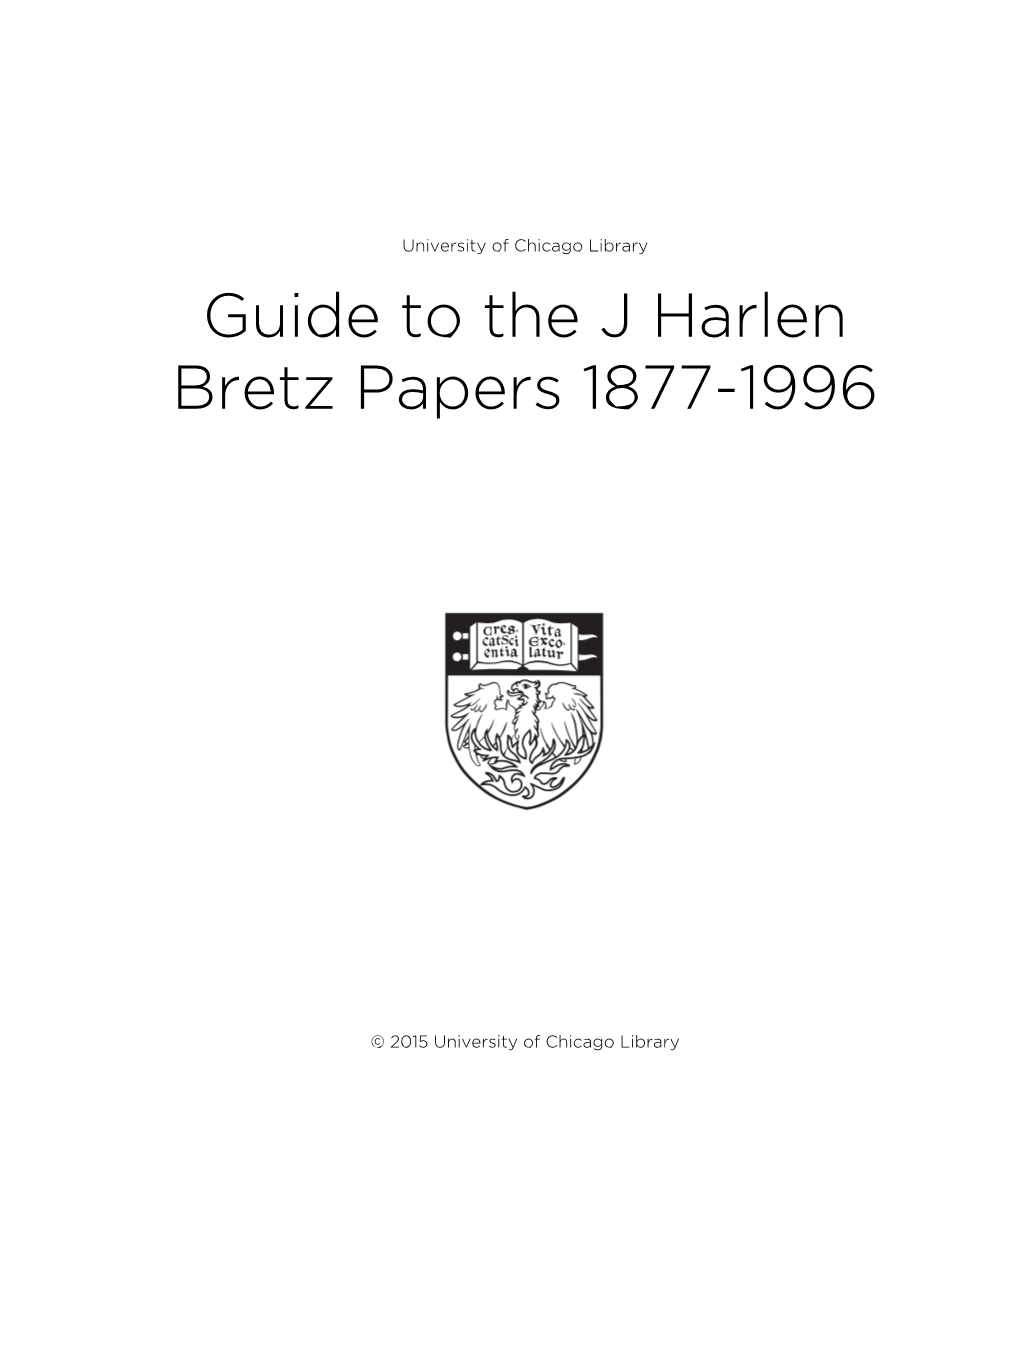 Guide to the J Harlen Bretz Papers 1877-1996